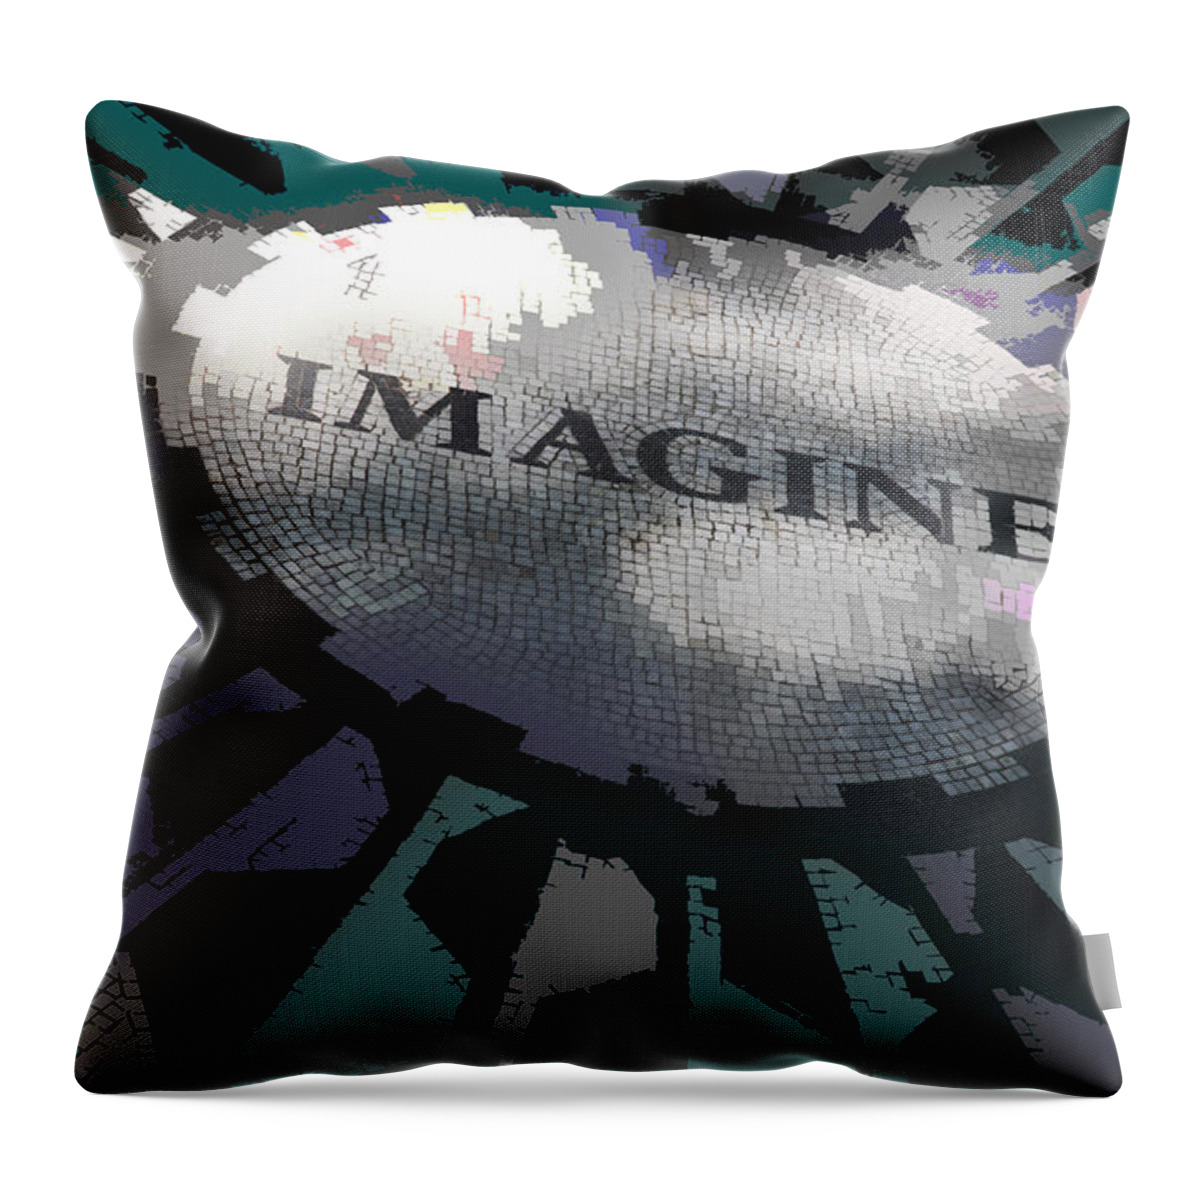 Imagine Throw Pillow featuring the photograph Imagine by Kelley King